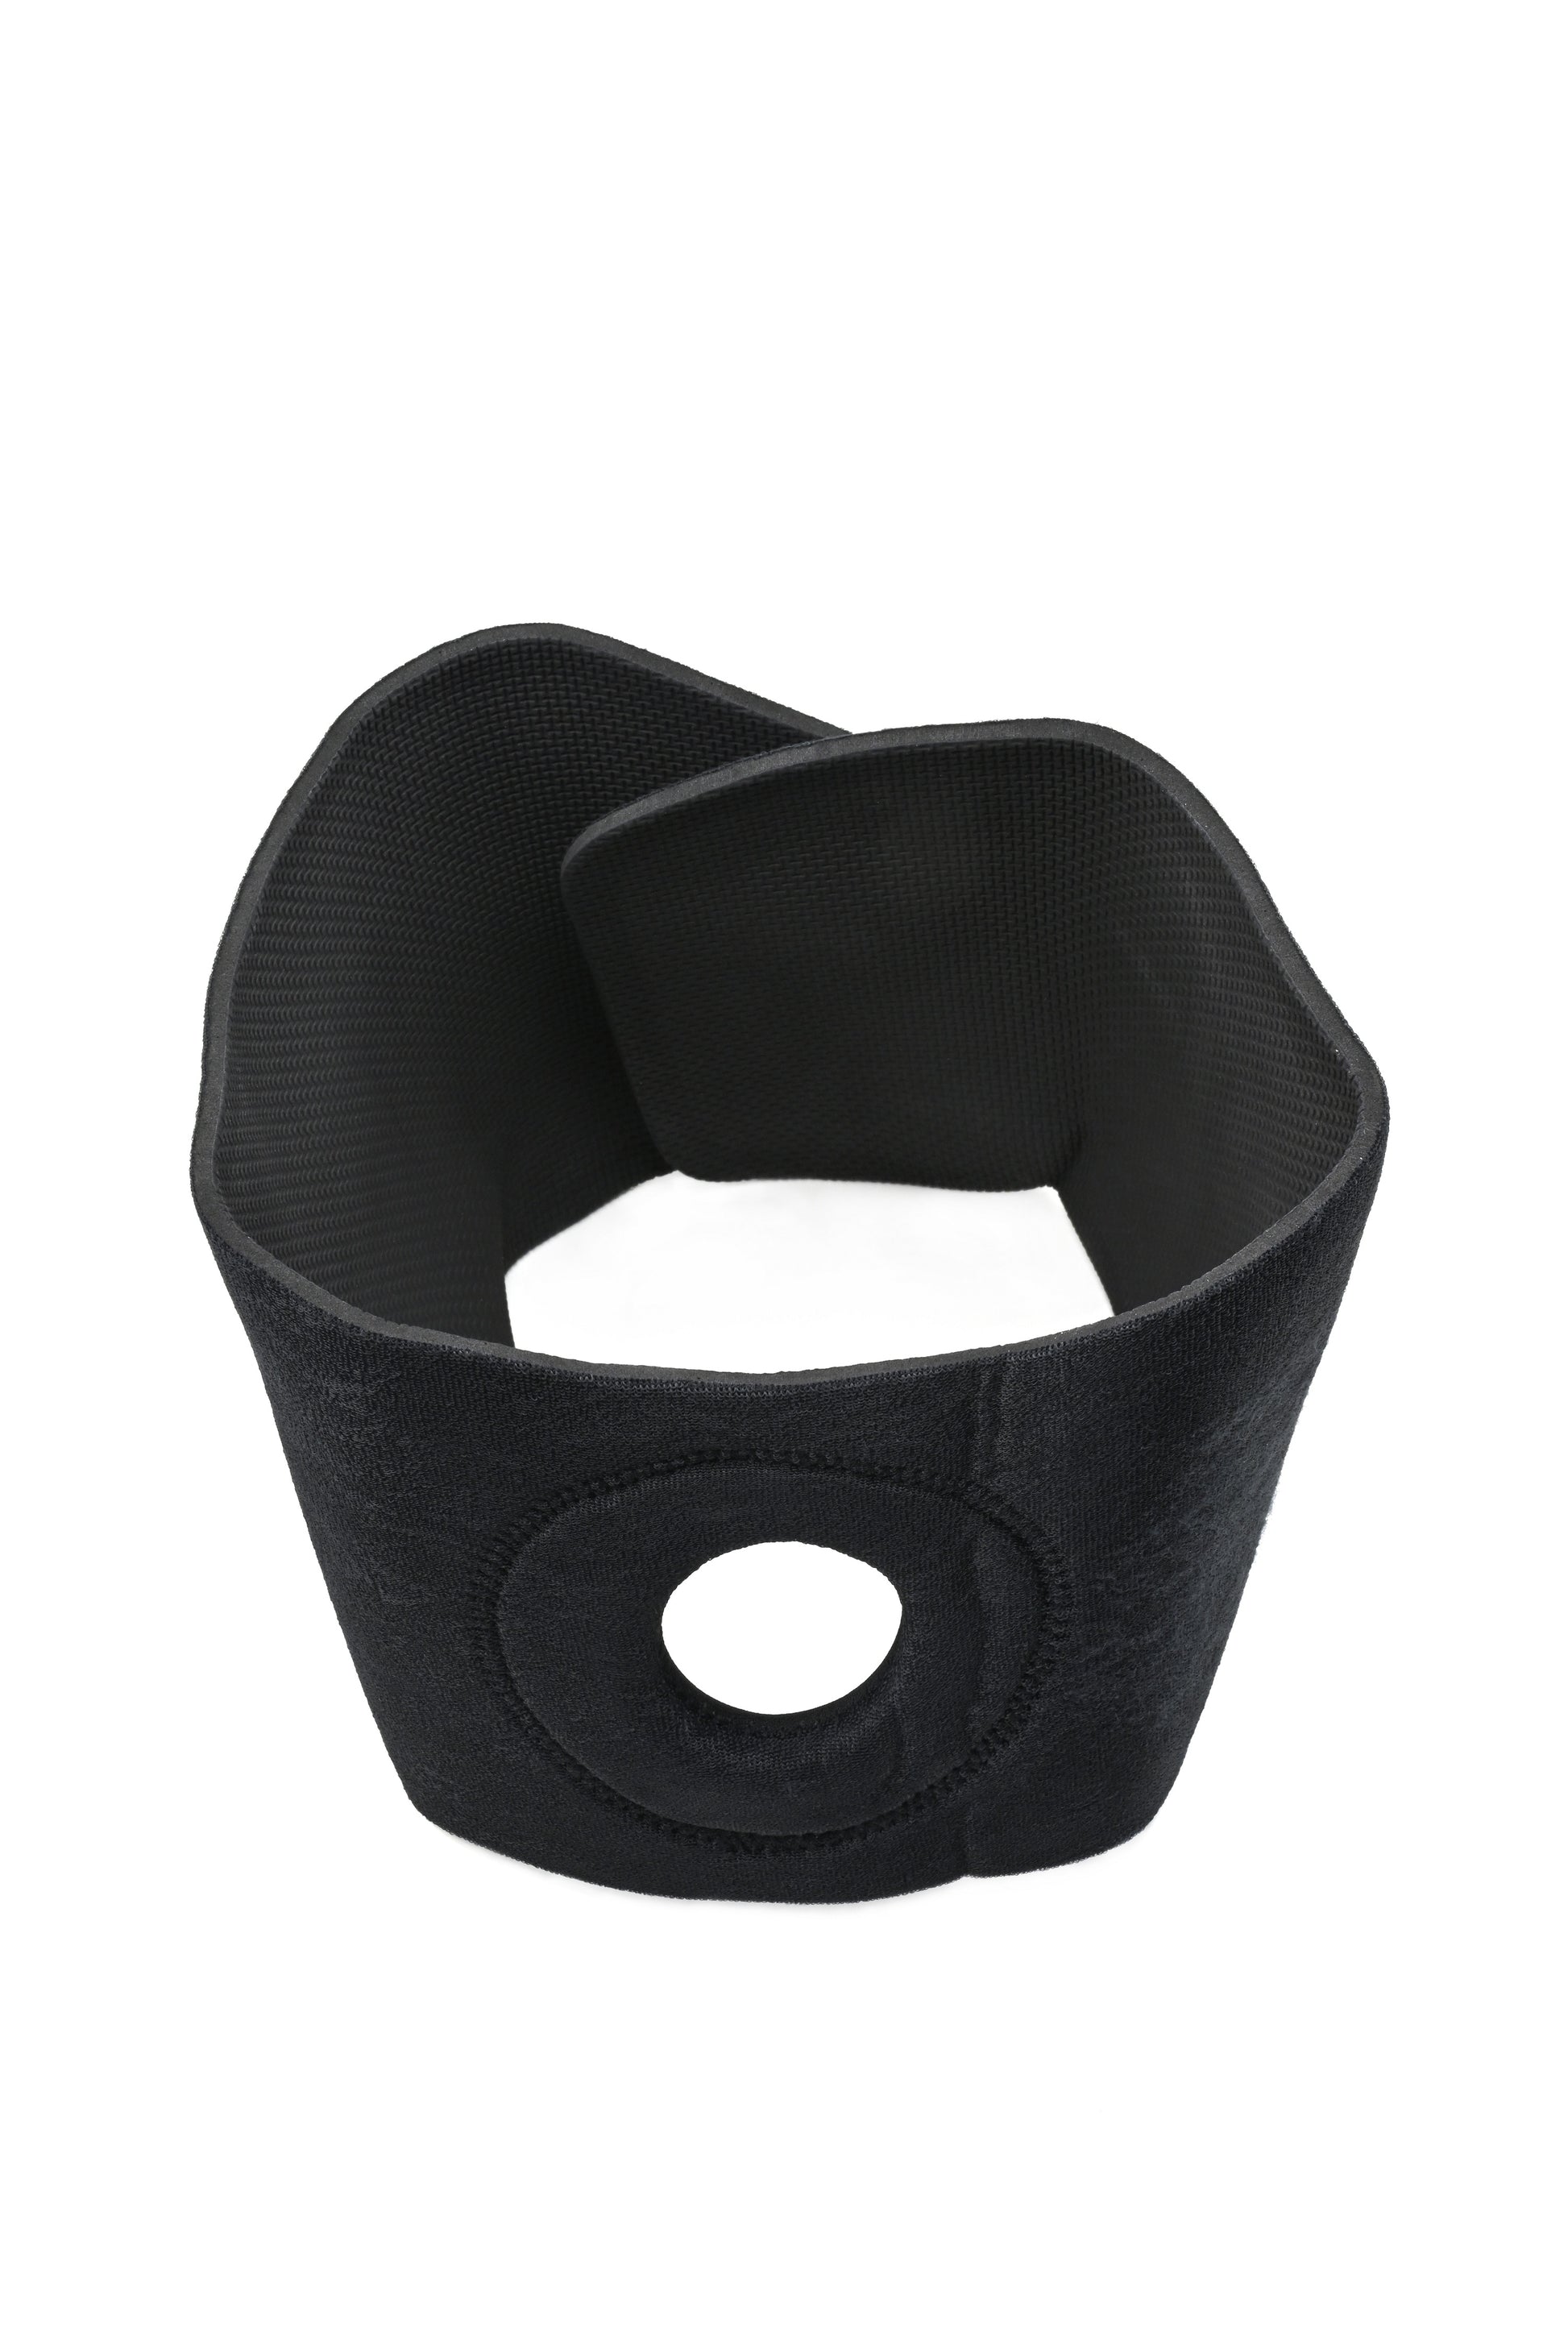 Photo of the thigh harness from the front to show its size and width.